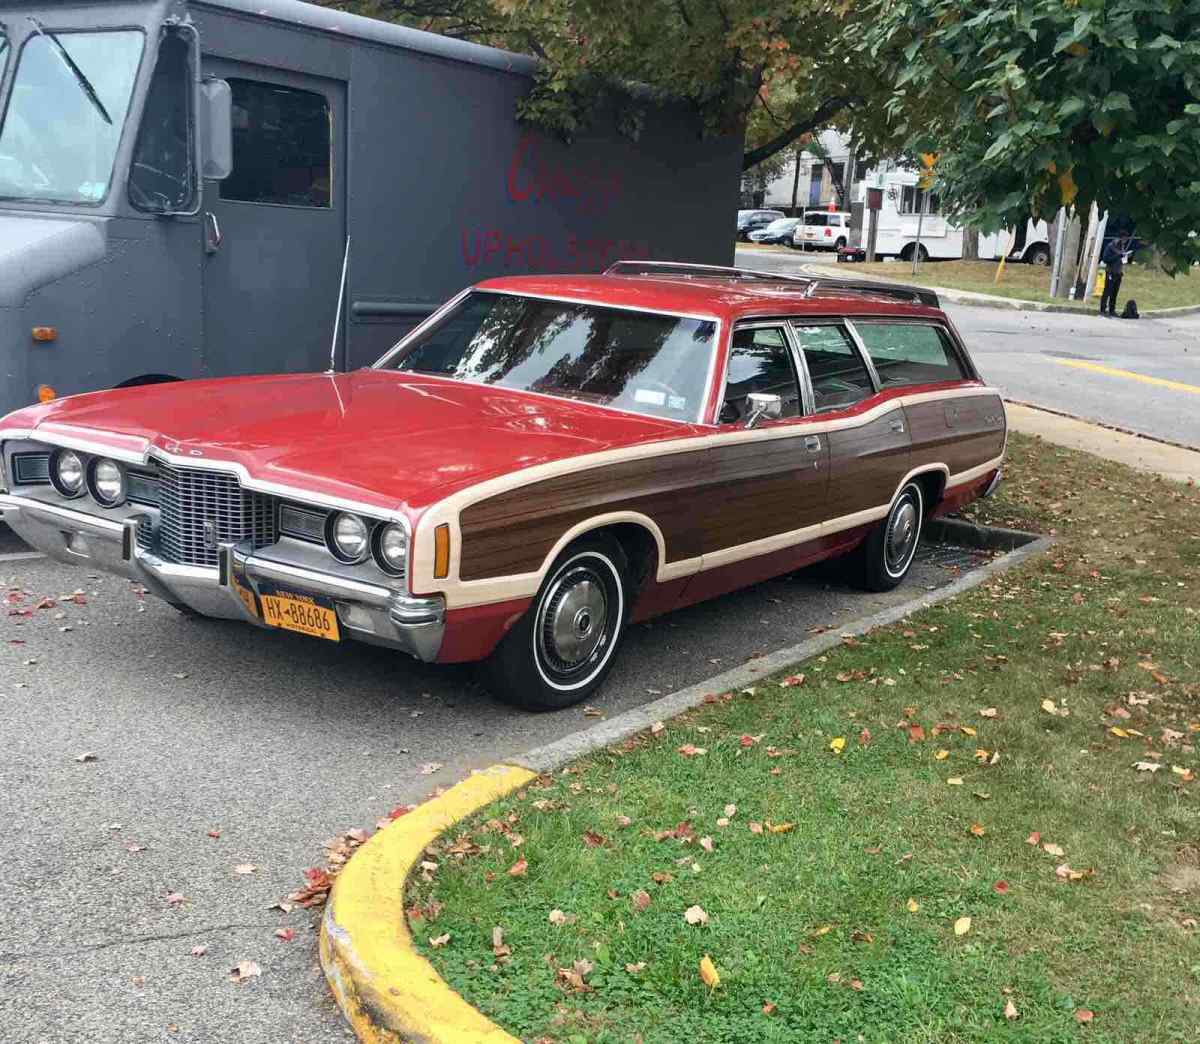 1971 Ford LTD country squire